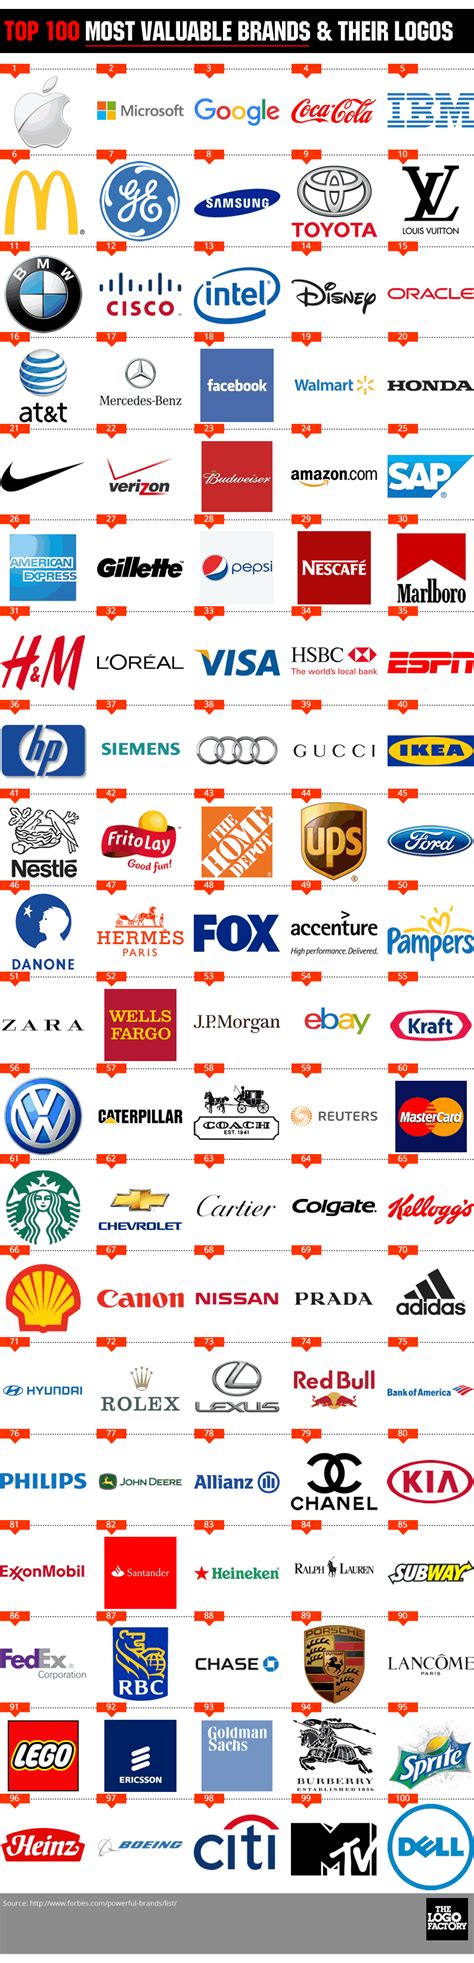 Top 100 Top Brand Logos In The World